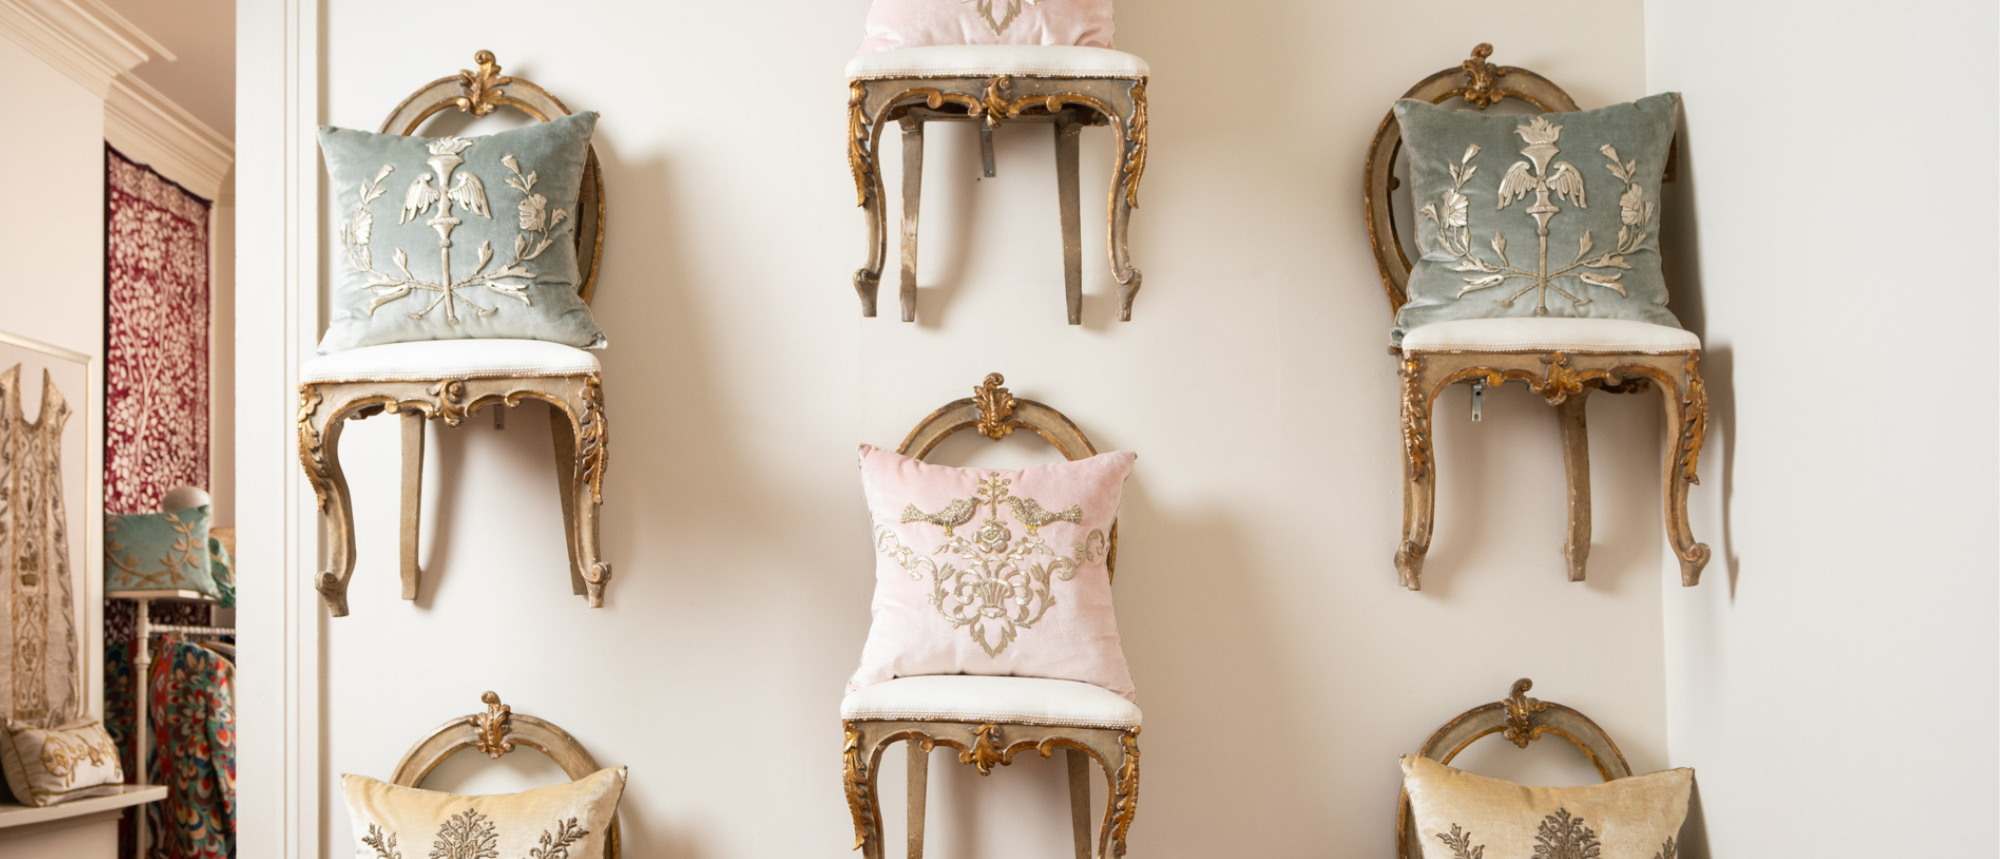 B. Viz Design New Orleans Atelier's famous Flying Chair Wall display features beautiful antique chairs on a white wall with extraordinary B. Viz Design antique textile square pillows in an array of colors and embroideries.